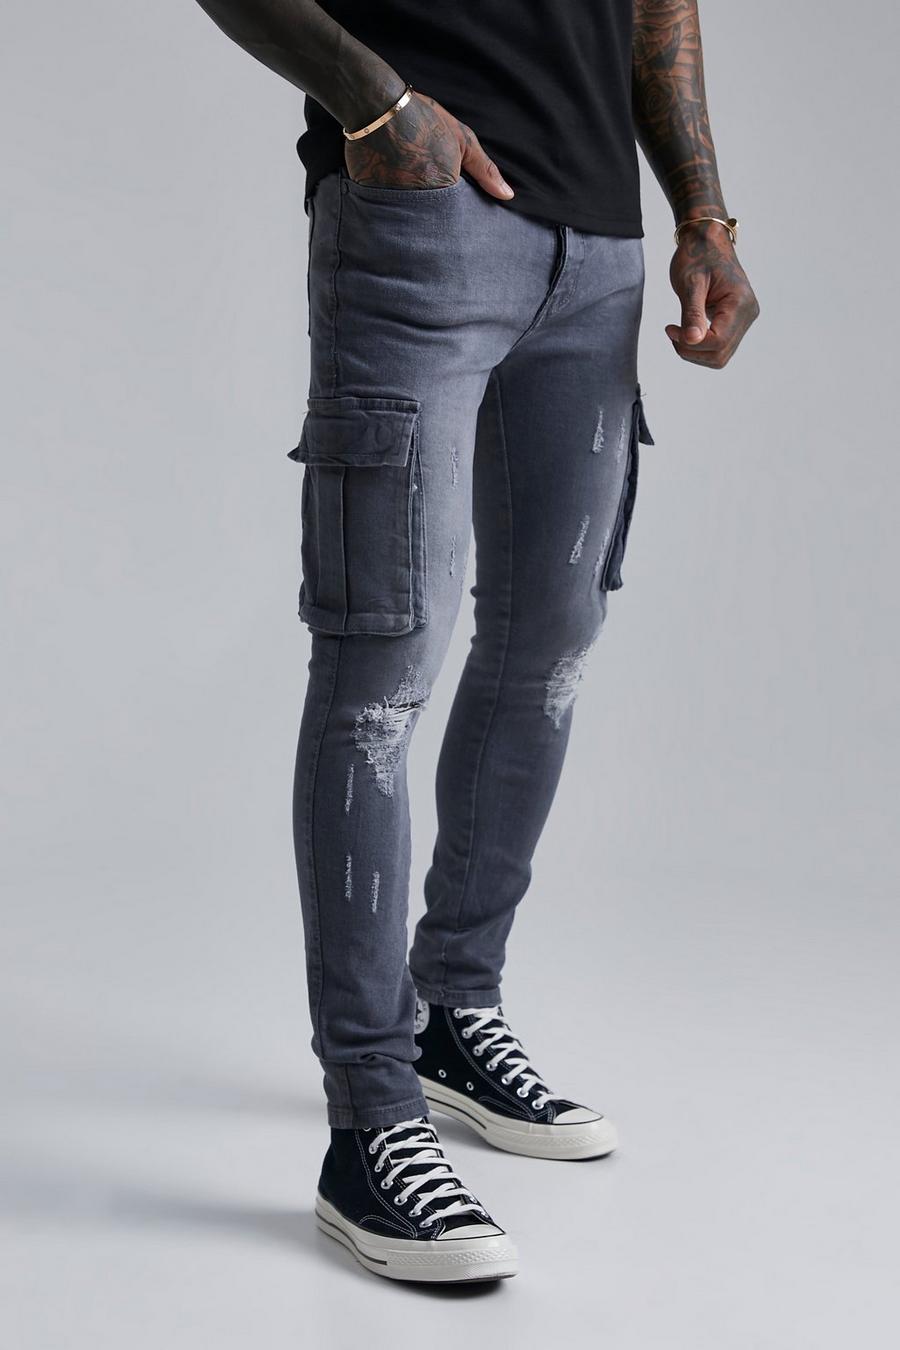 Super Skinny Cargo Jeans With Knee boohoo